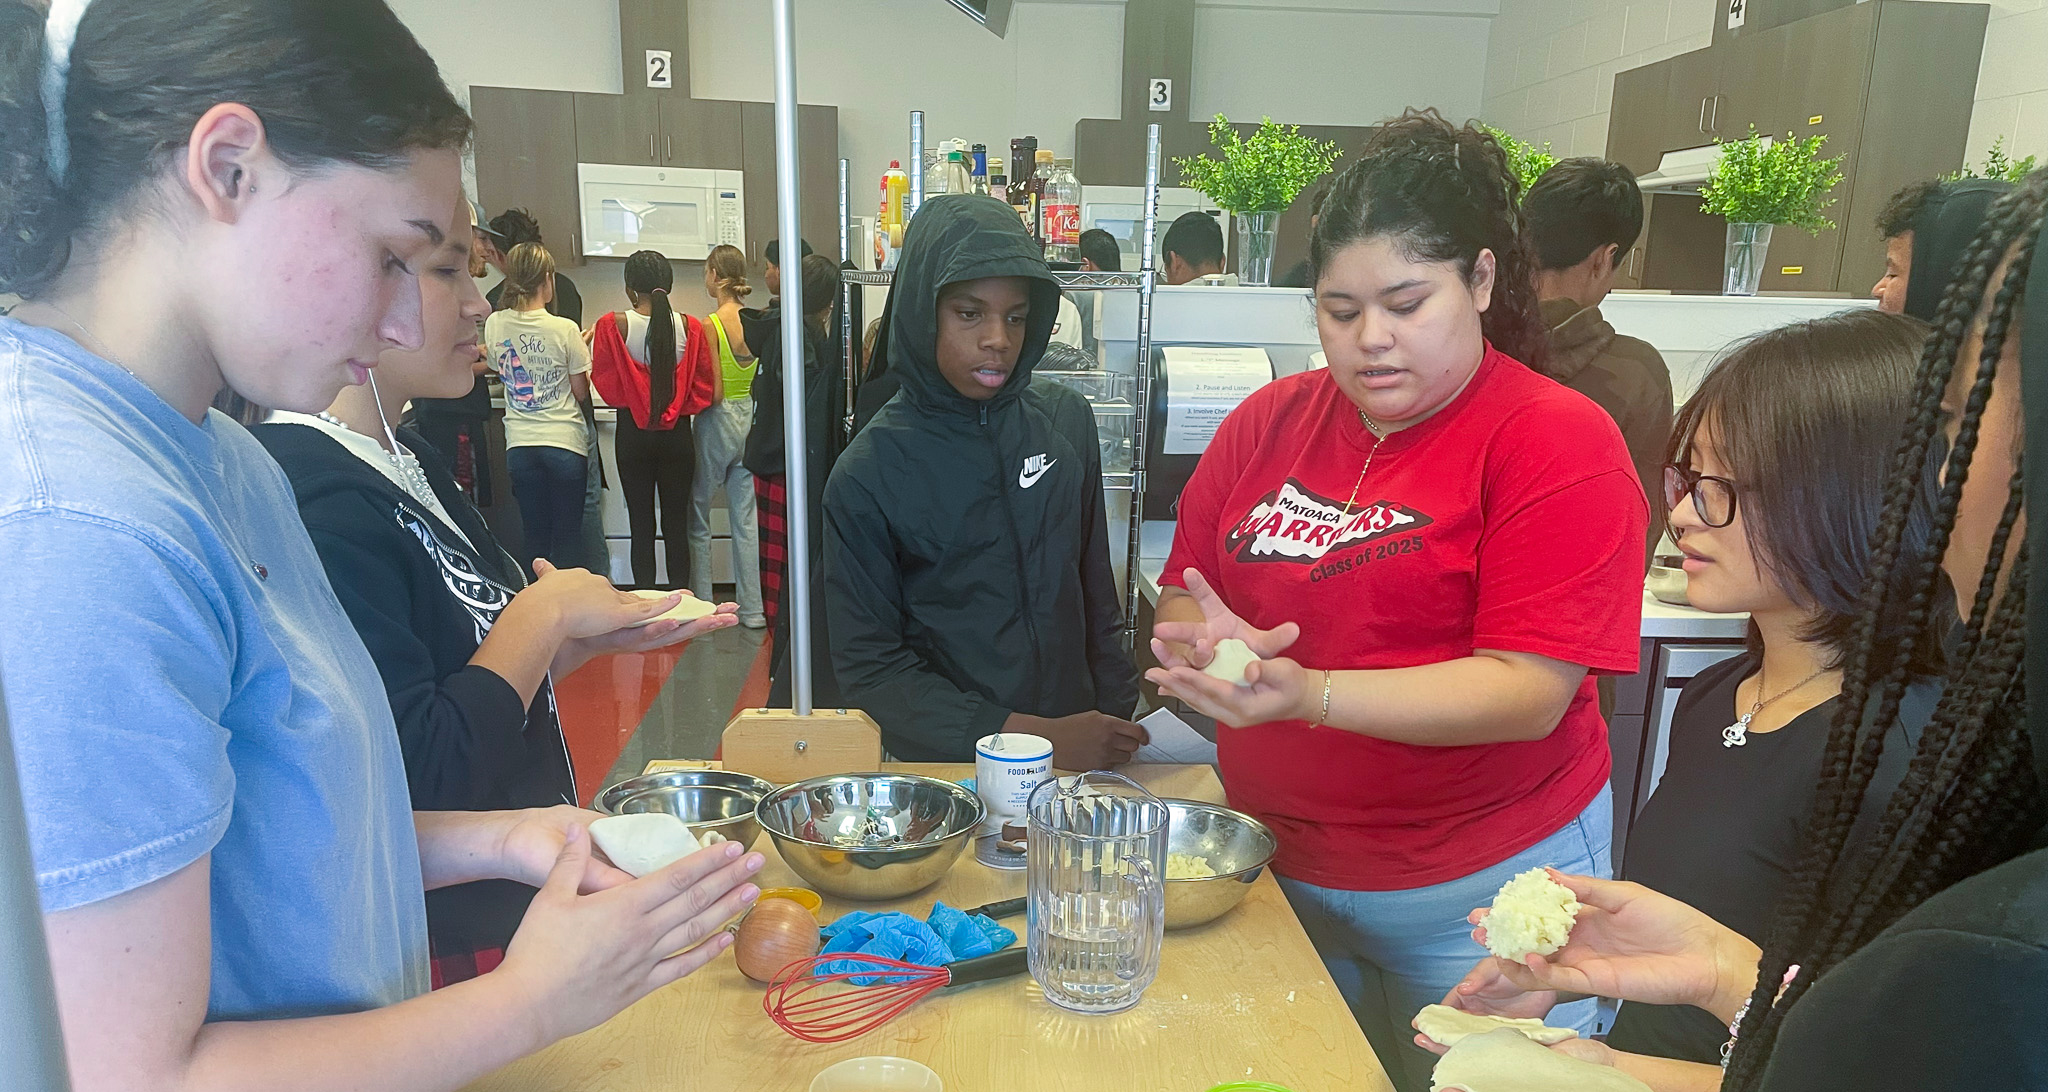 Students making food during a class